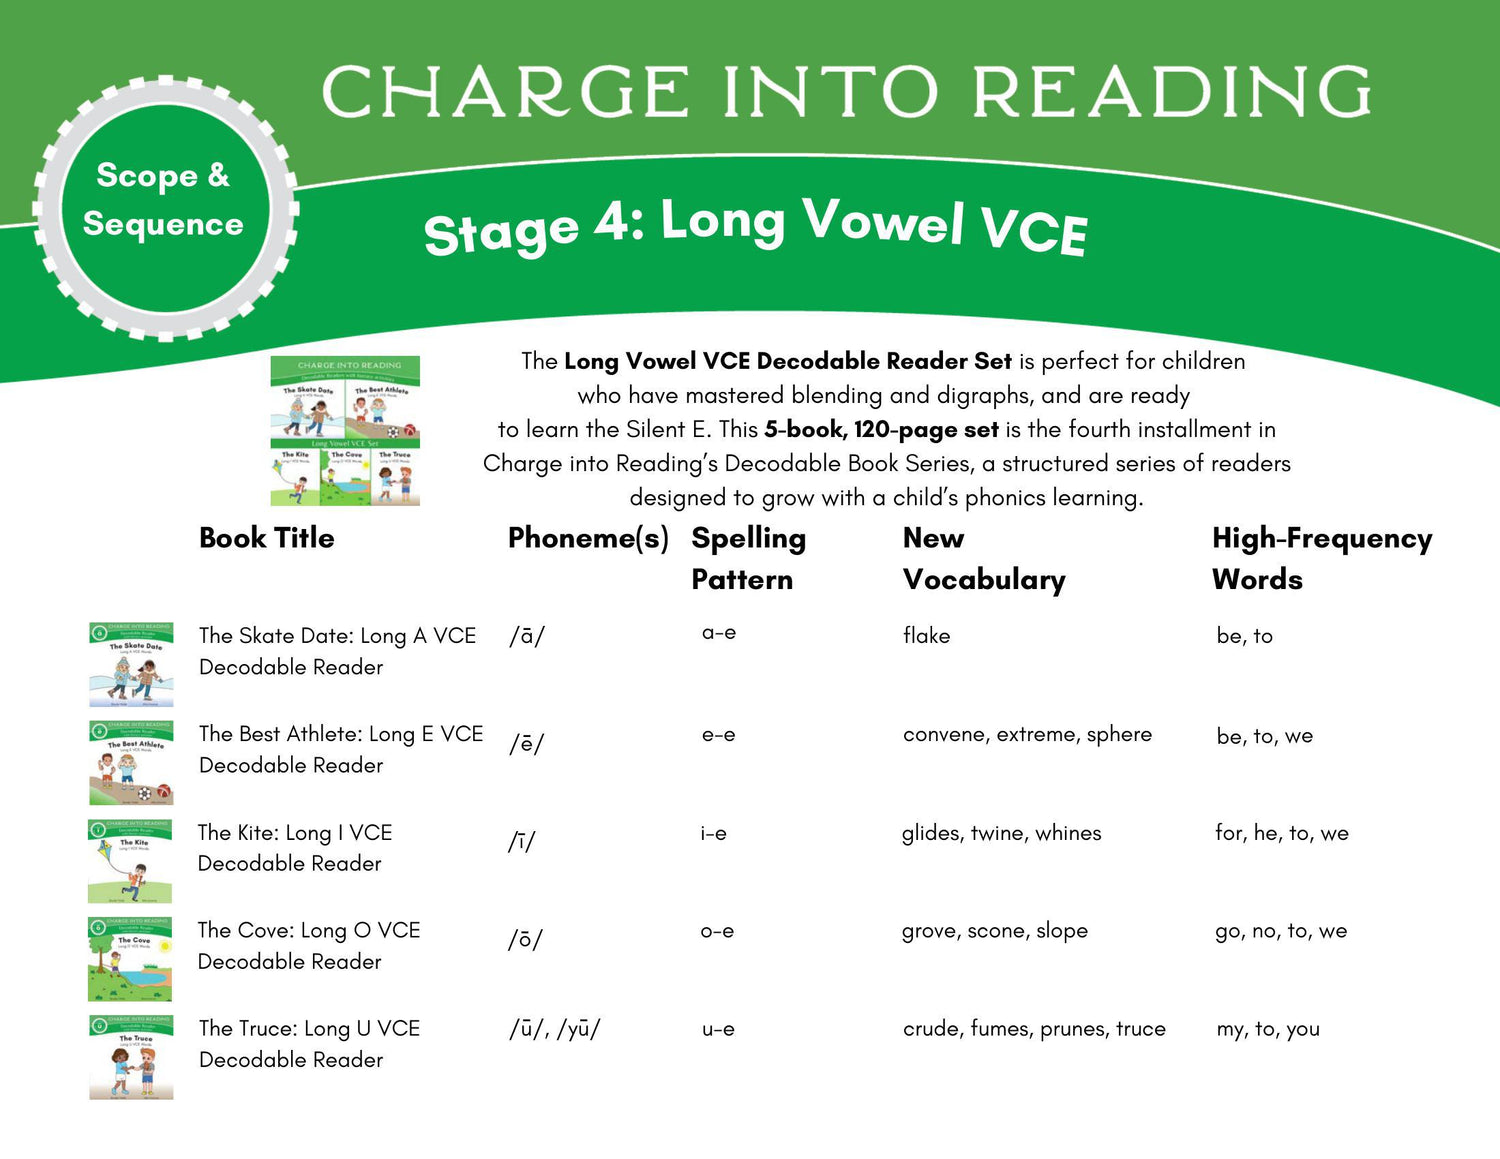 The scope and sequence for stage 4 of the Charge into Reading Decodable Reading System: Long Vowel VCE